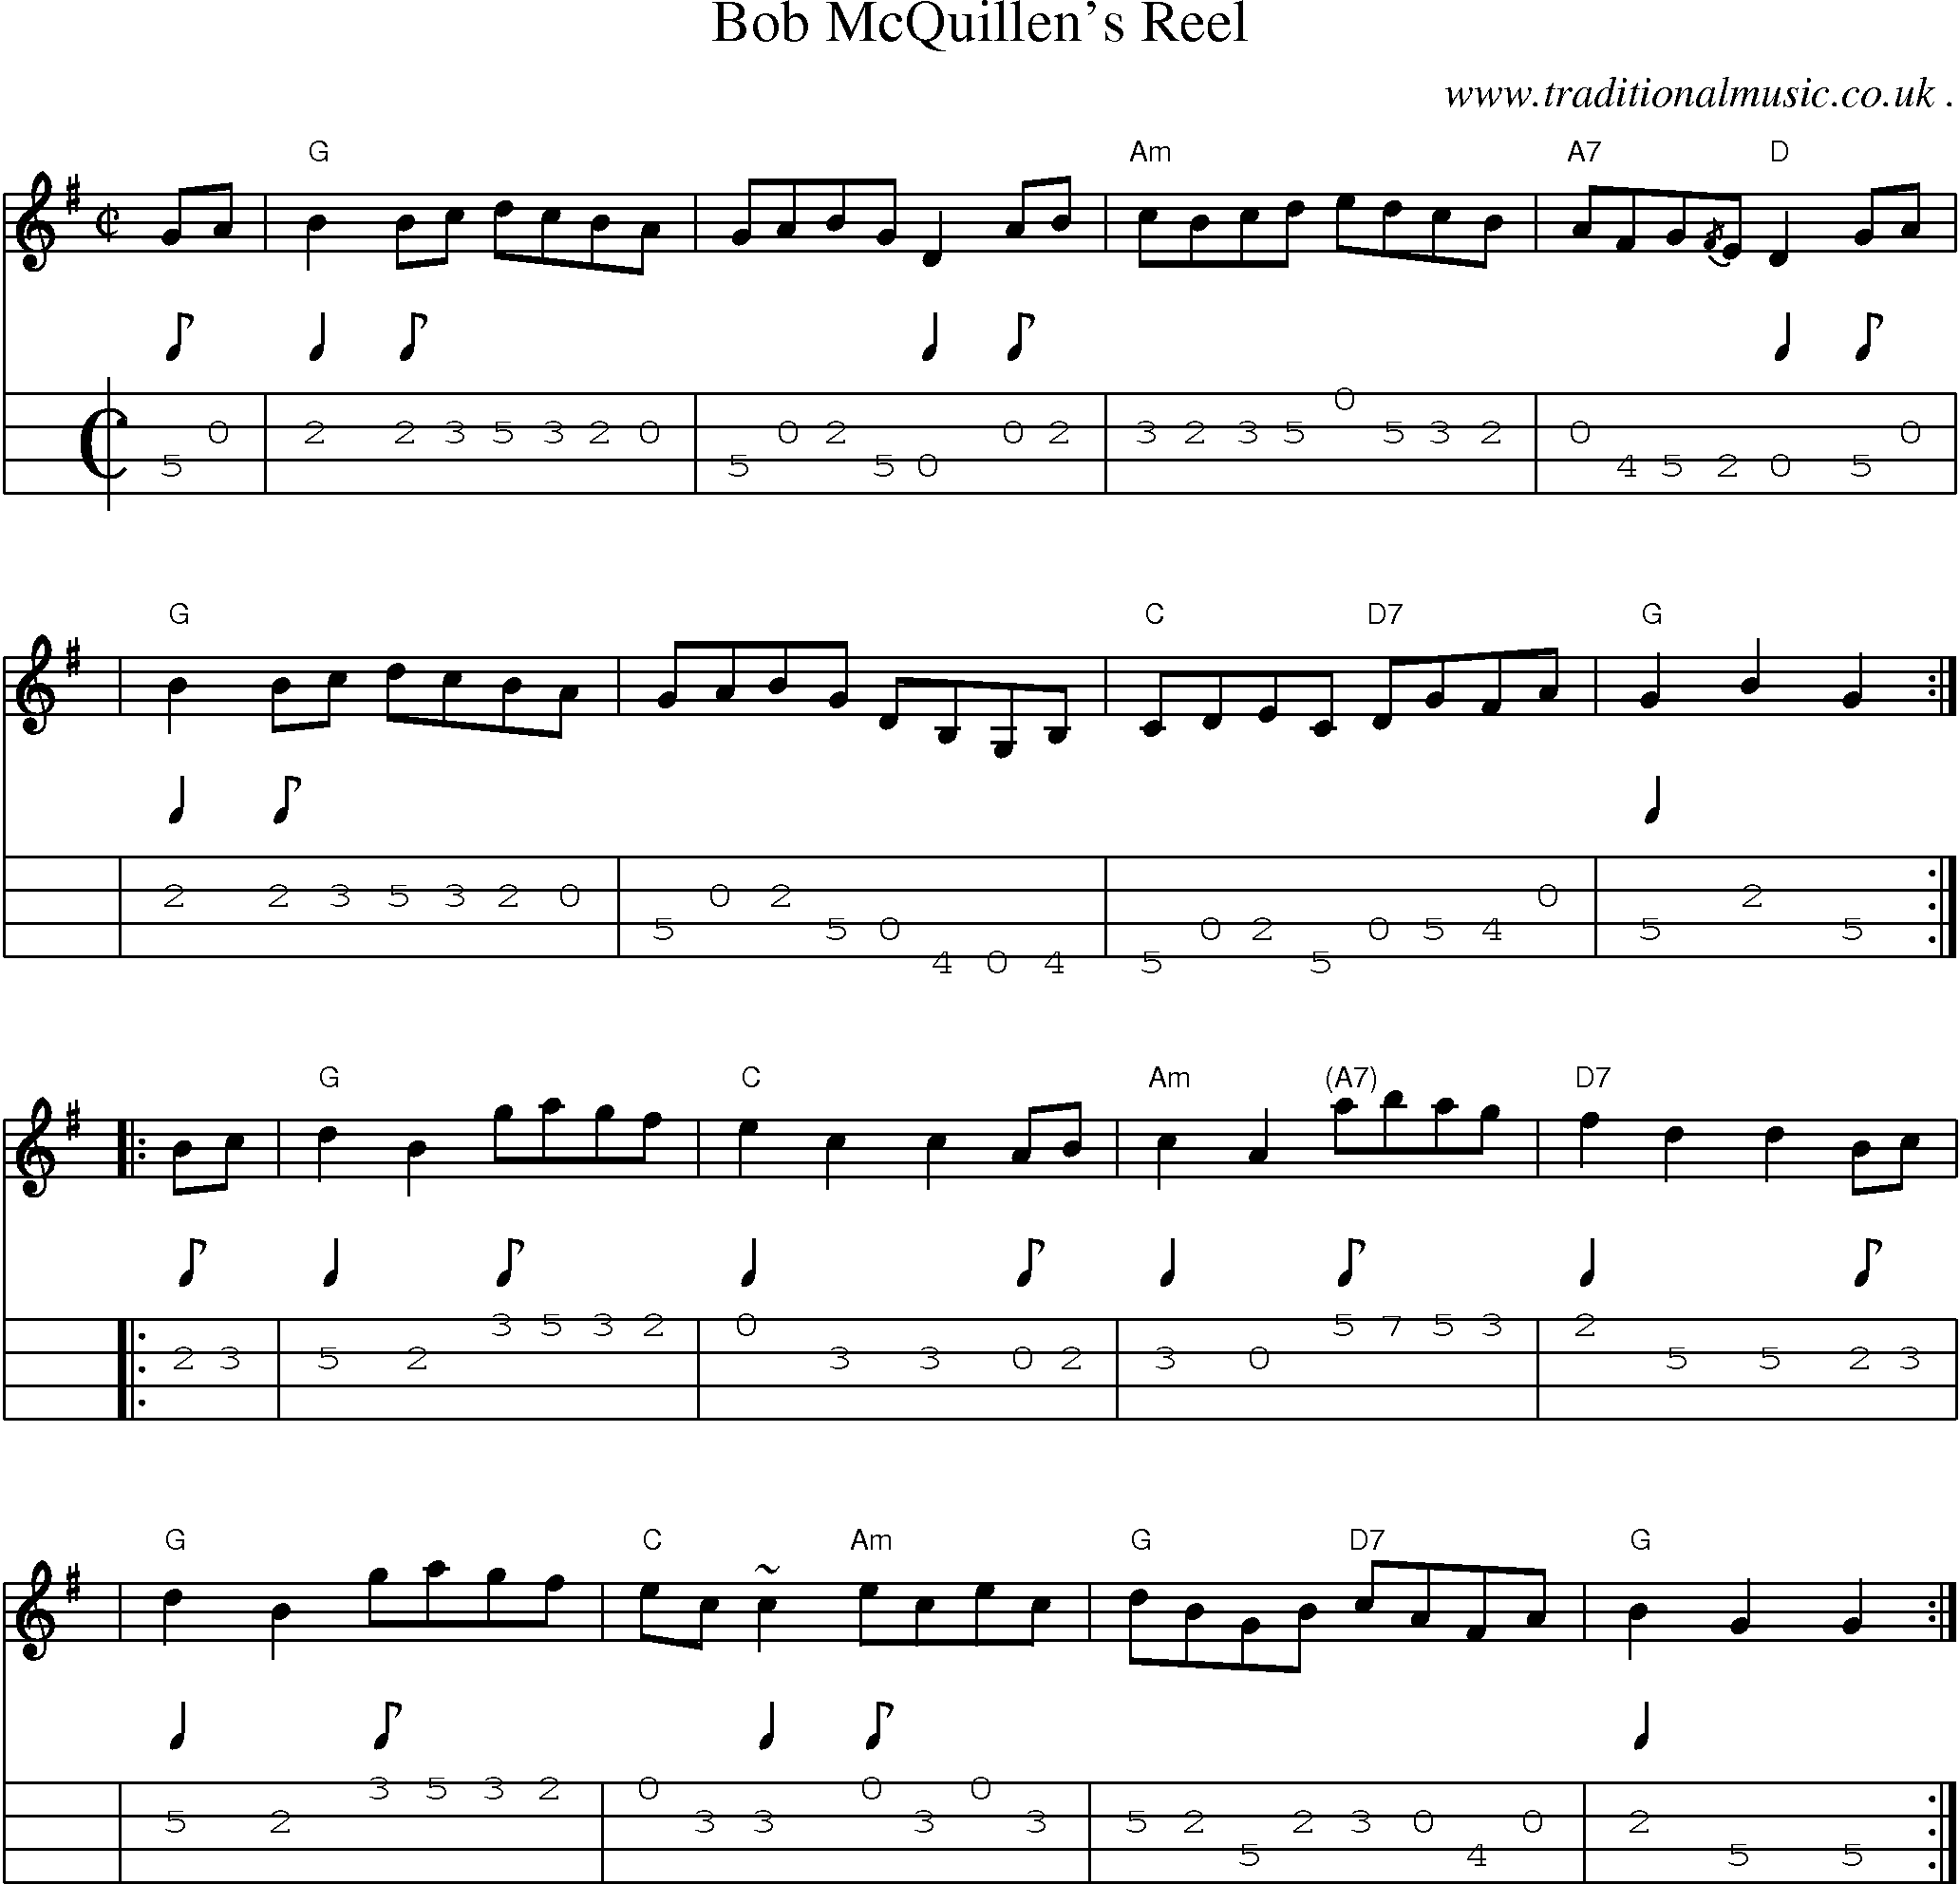 Sheet-music  score, Chords and Mandolin Tabs for Bob Mcquillens Reel